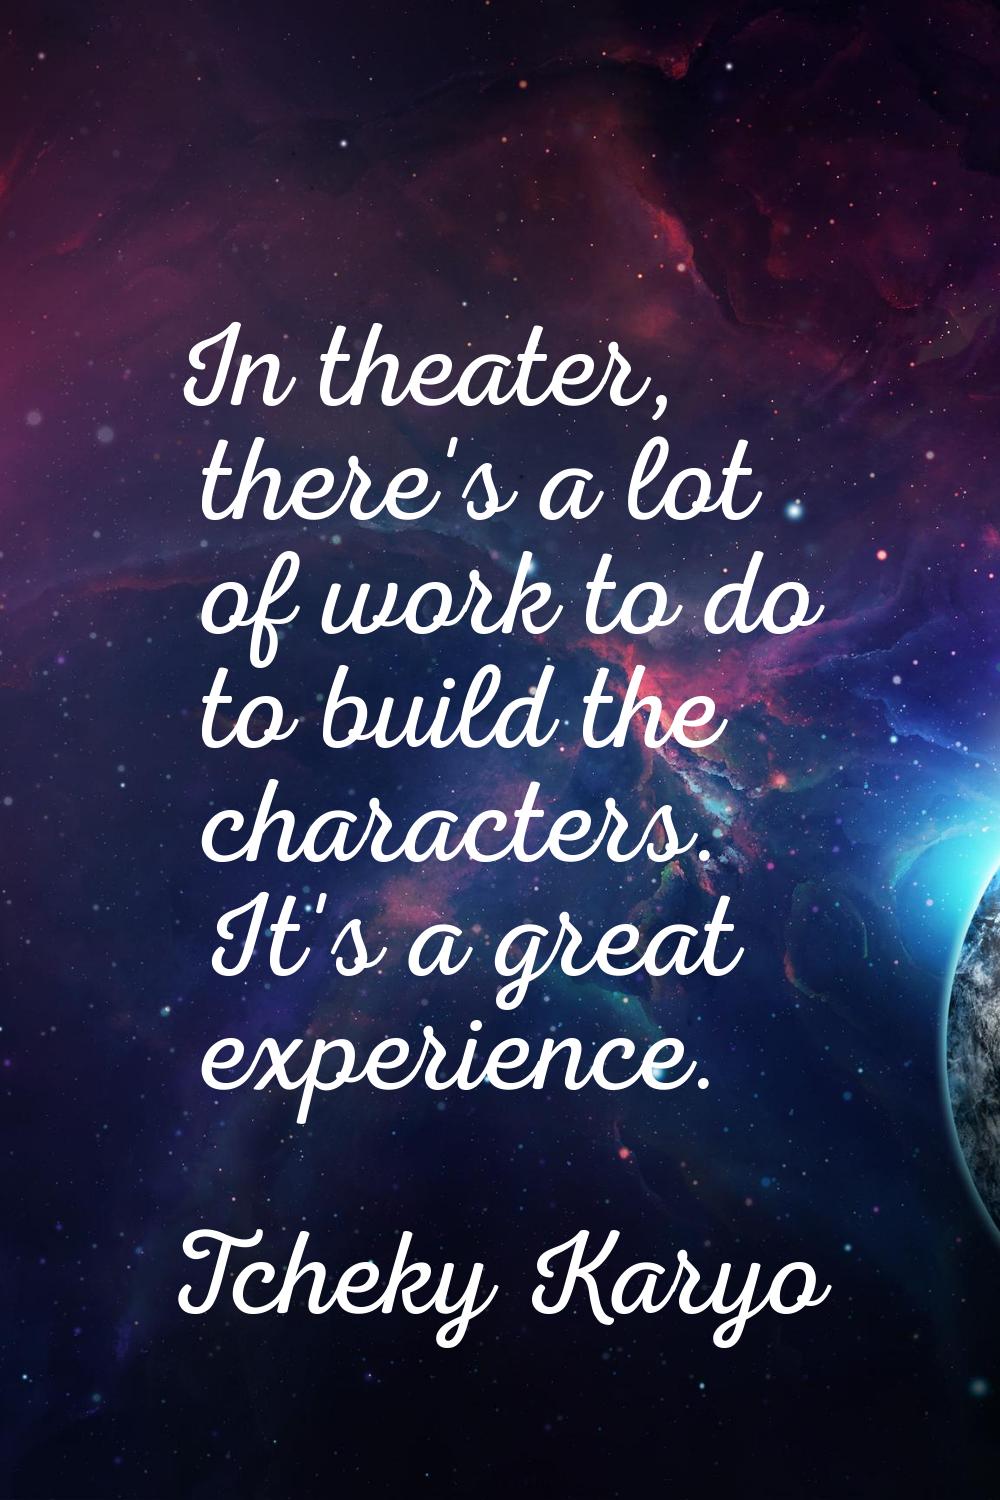 In theater, there's a lot of work to do to build the characters. It's a great experience.